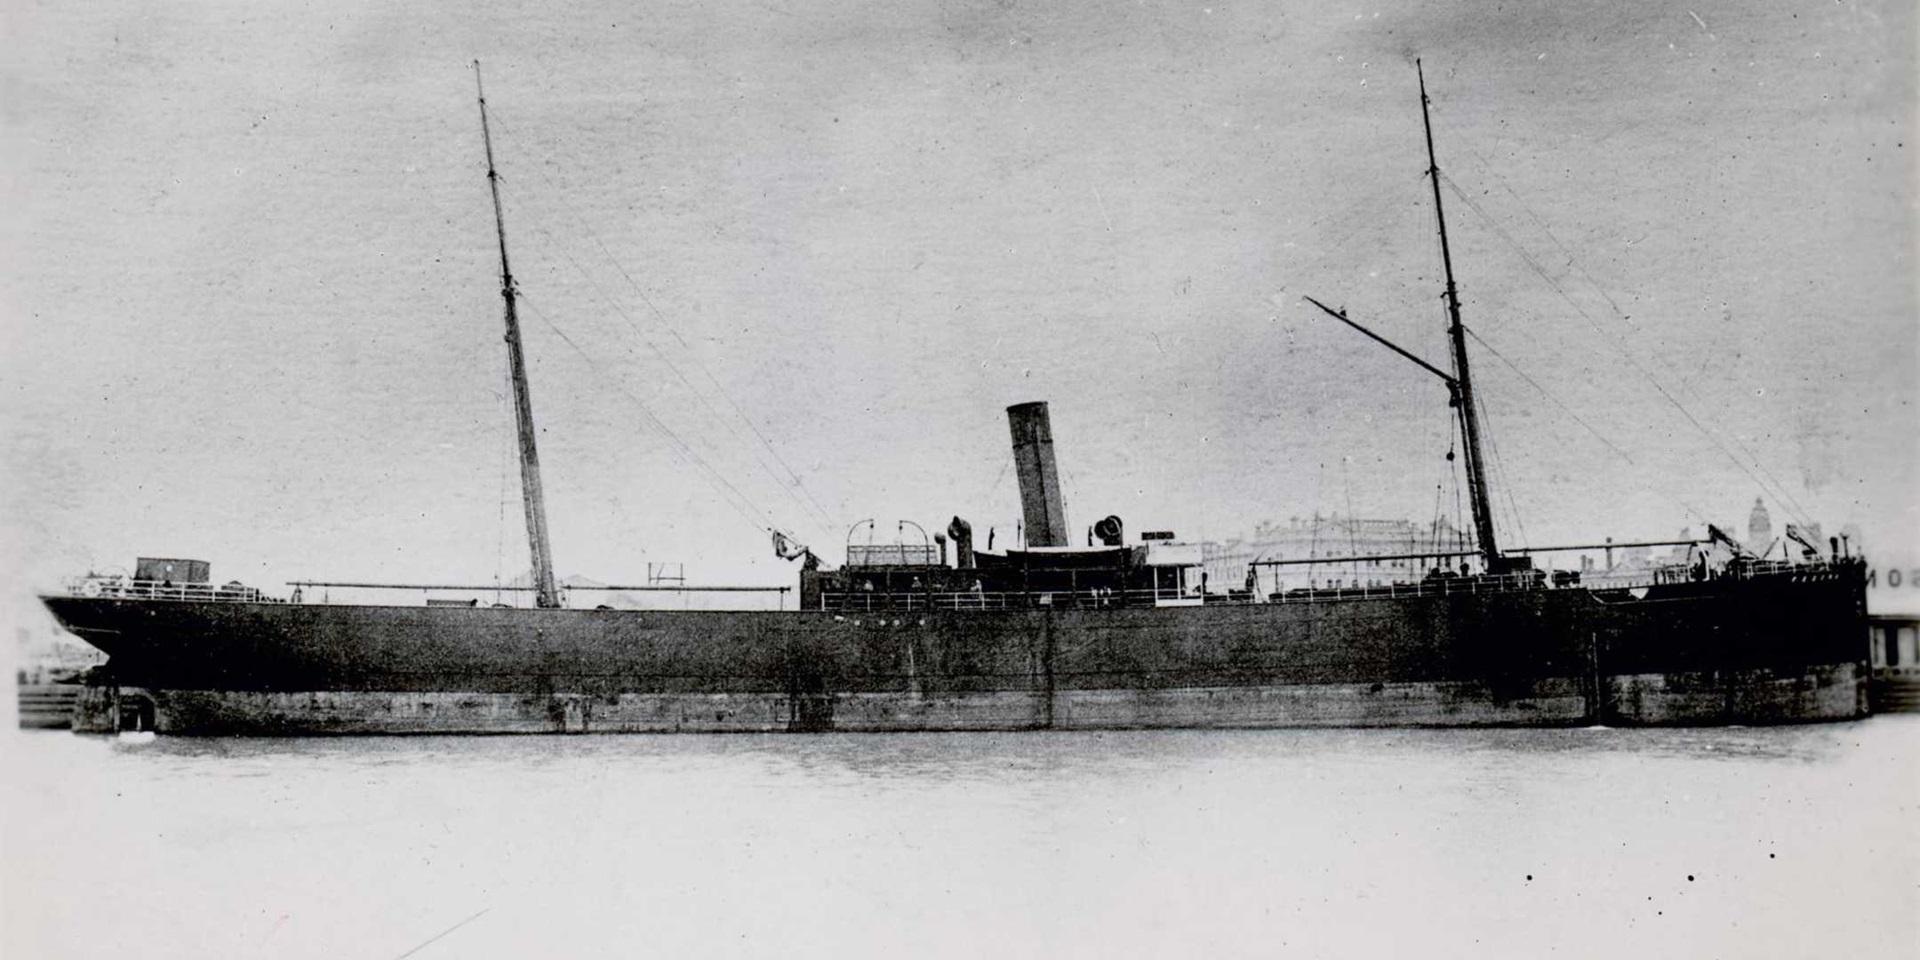 Black and white photograph of a ship